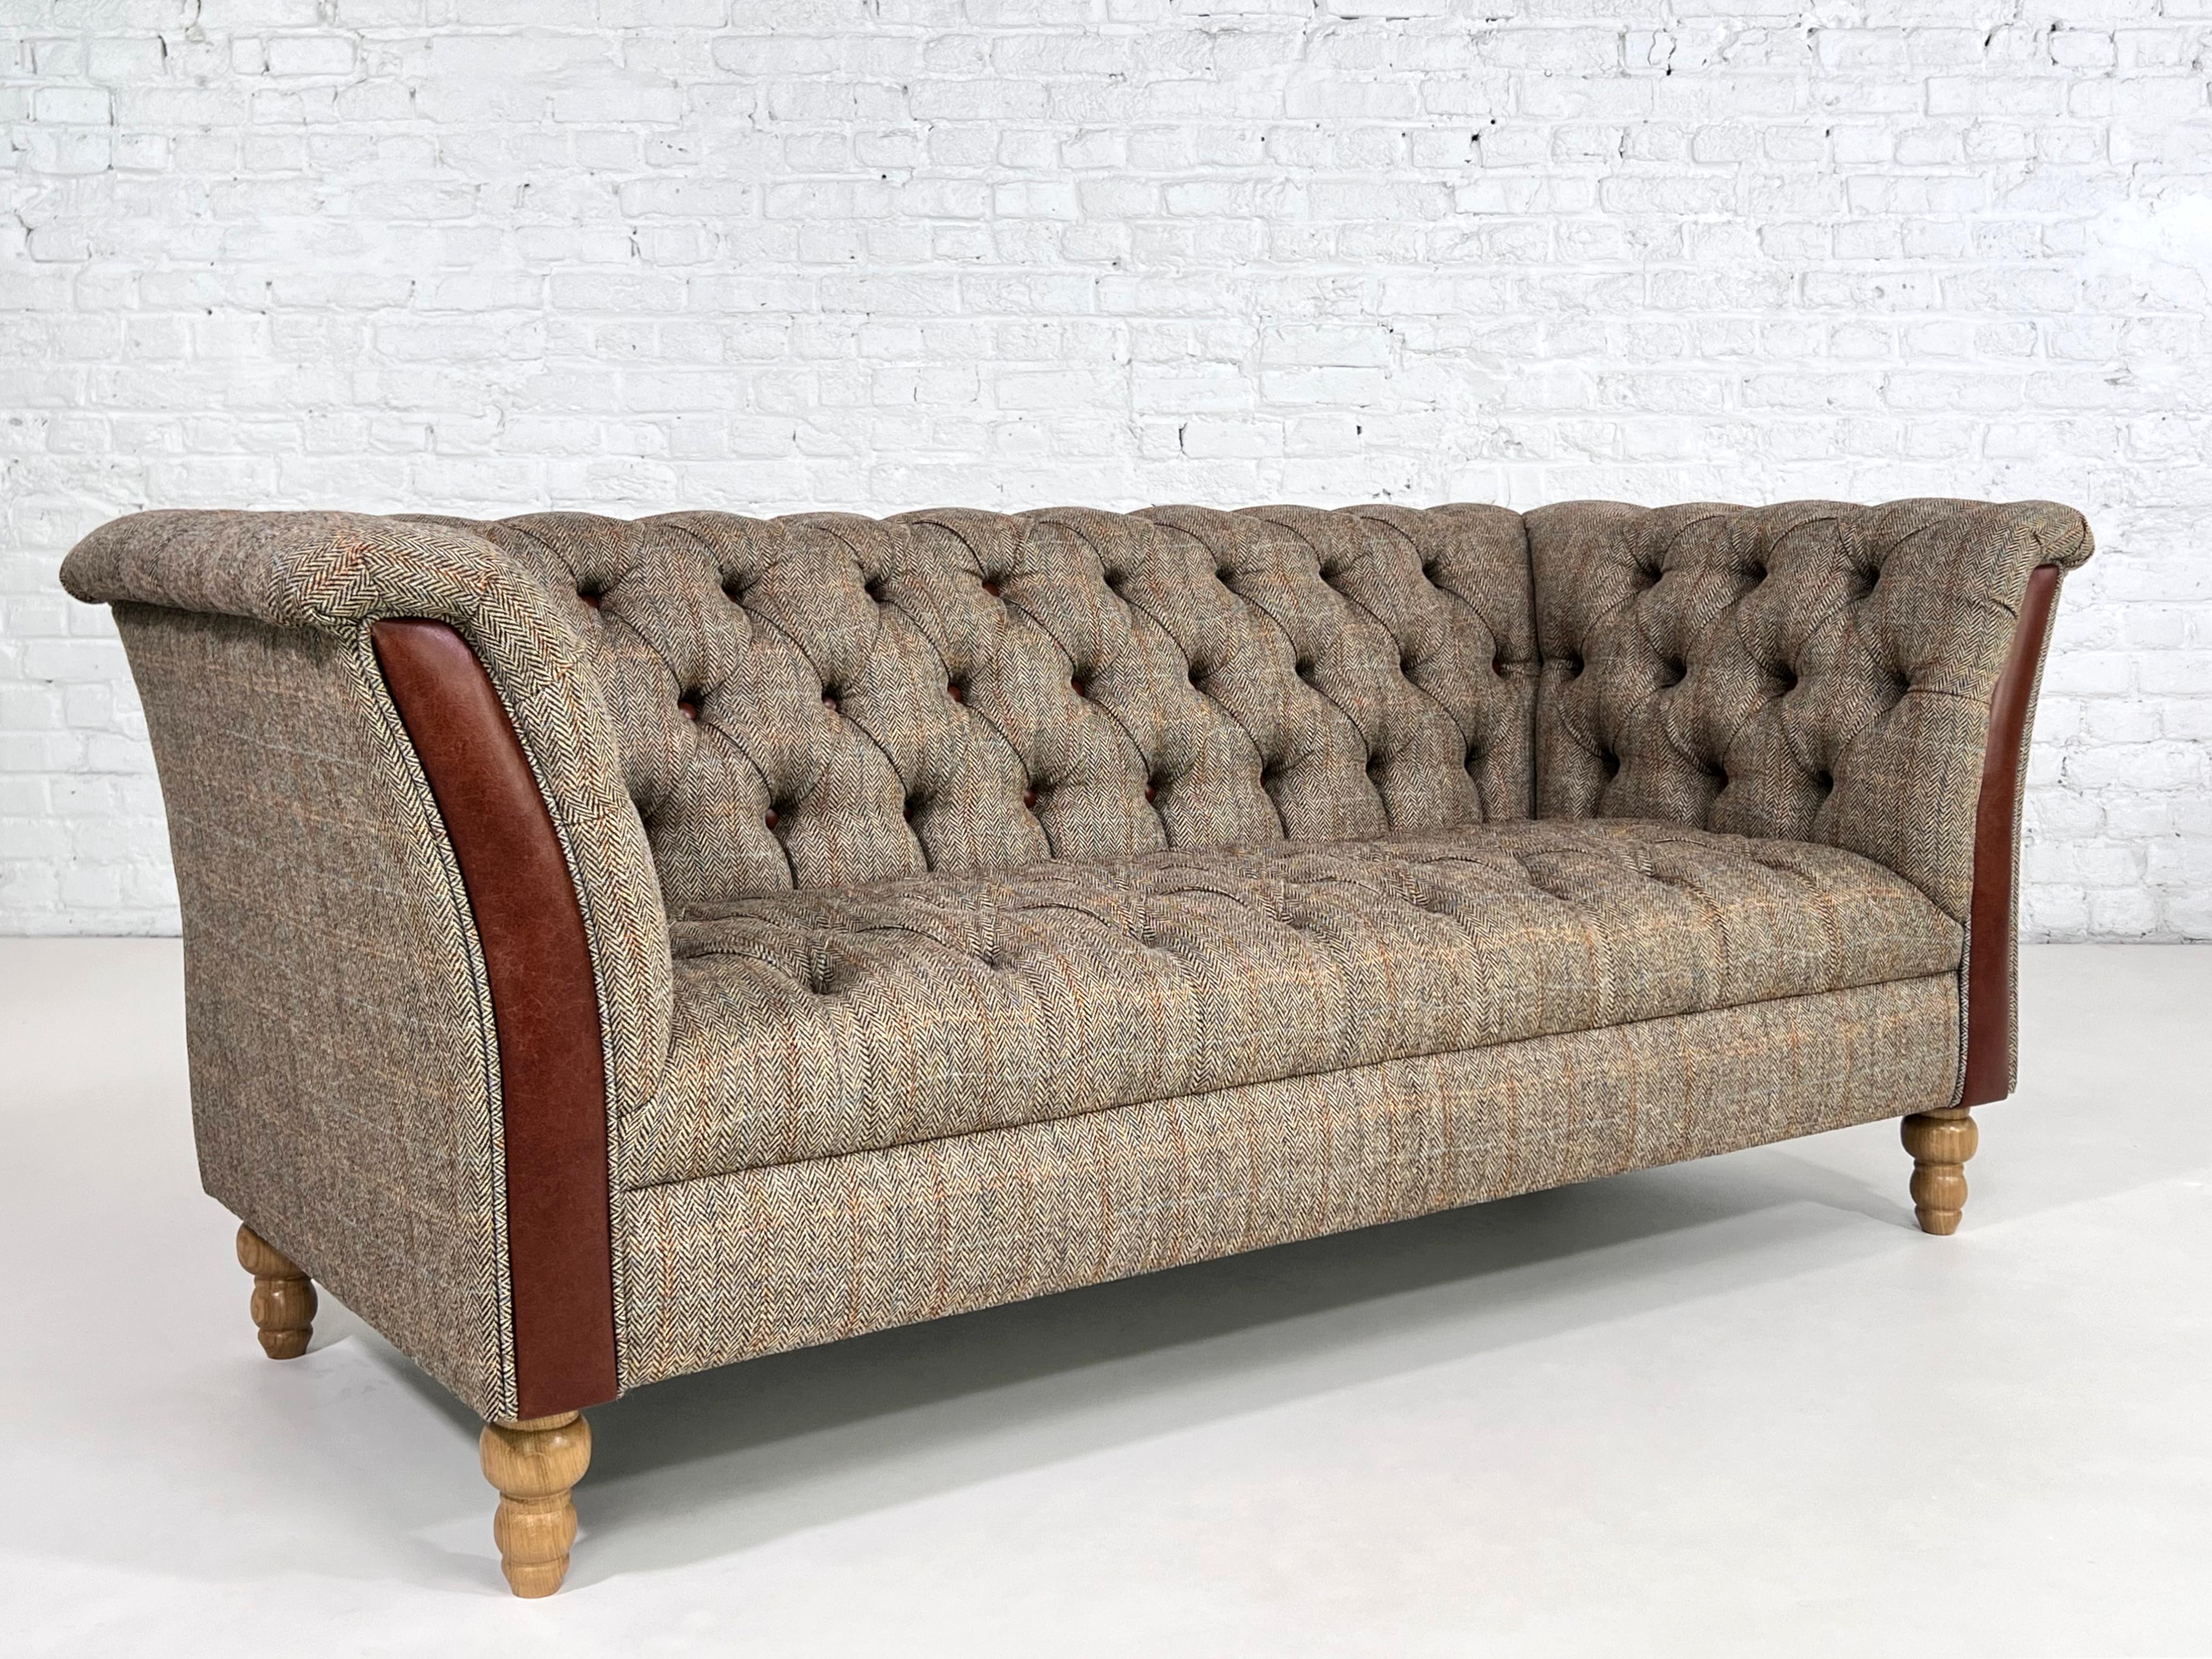 Wool Tweet Fabric WIth Leather Padded Button Finishes And Wood Chesterfield Sofa.